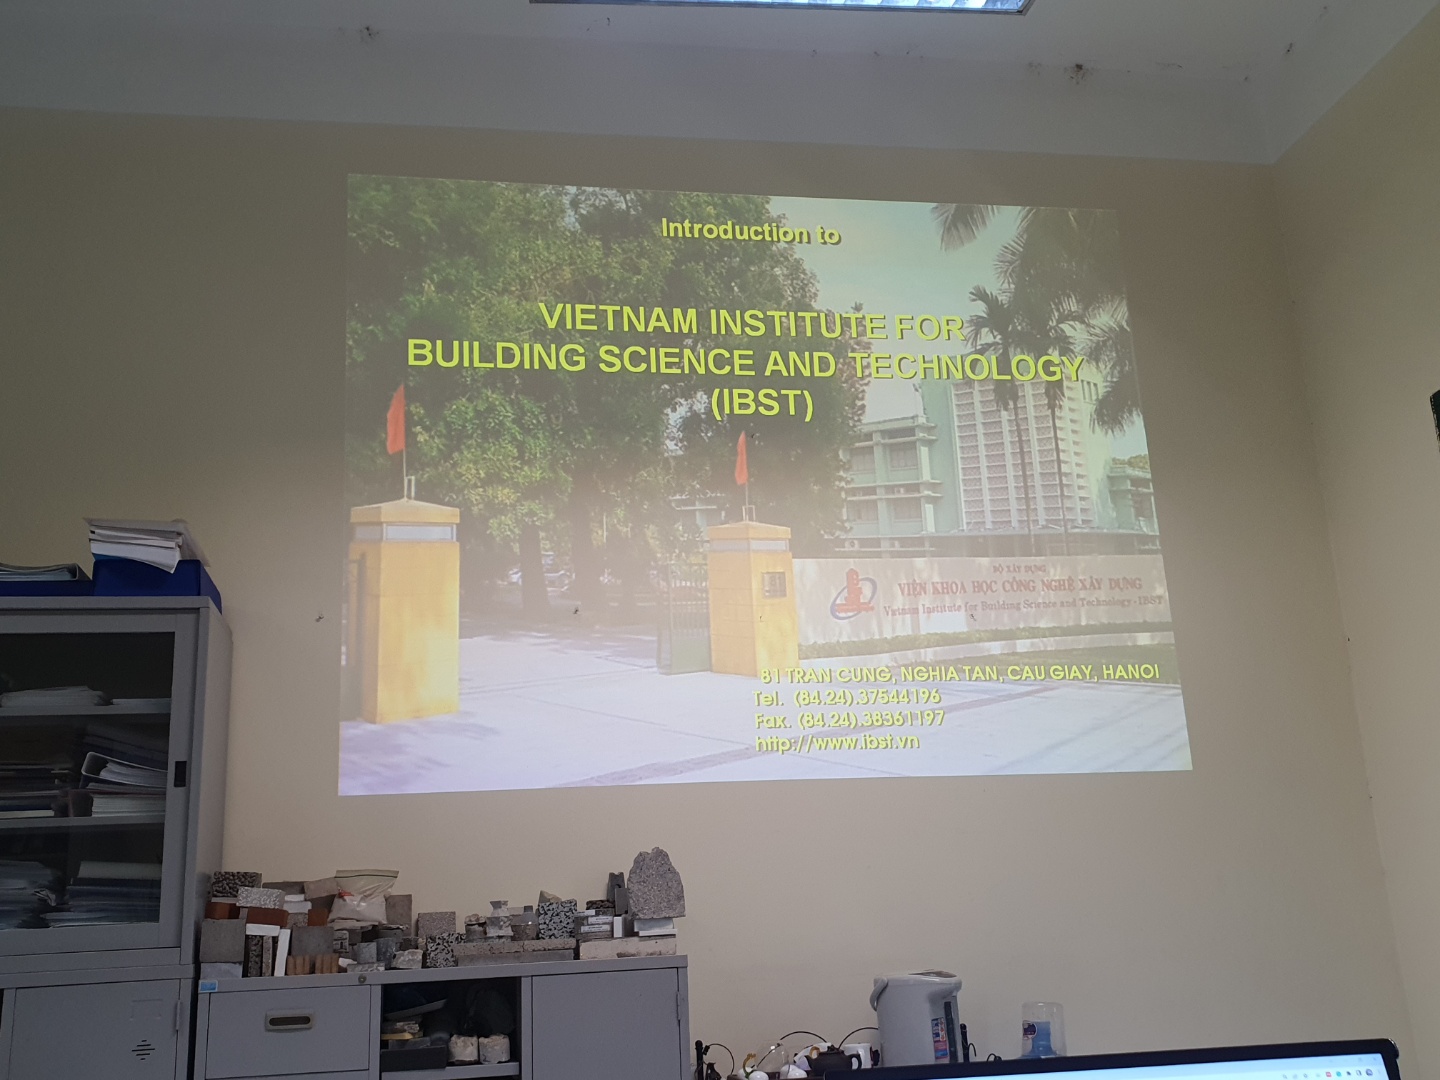 Institute of Concrete Technology, Institute for Building Science and Technology, Vietnam 03